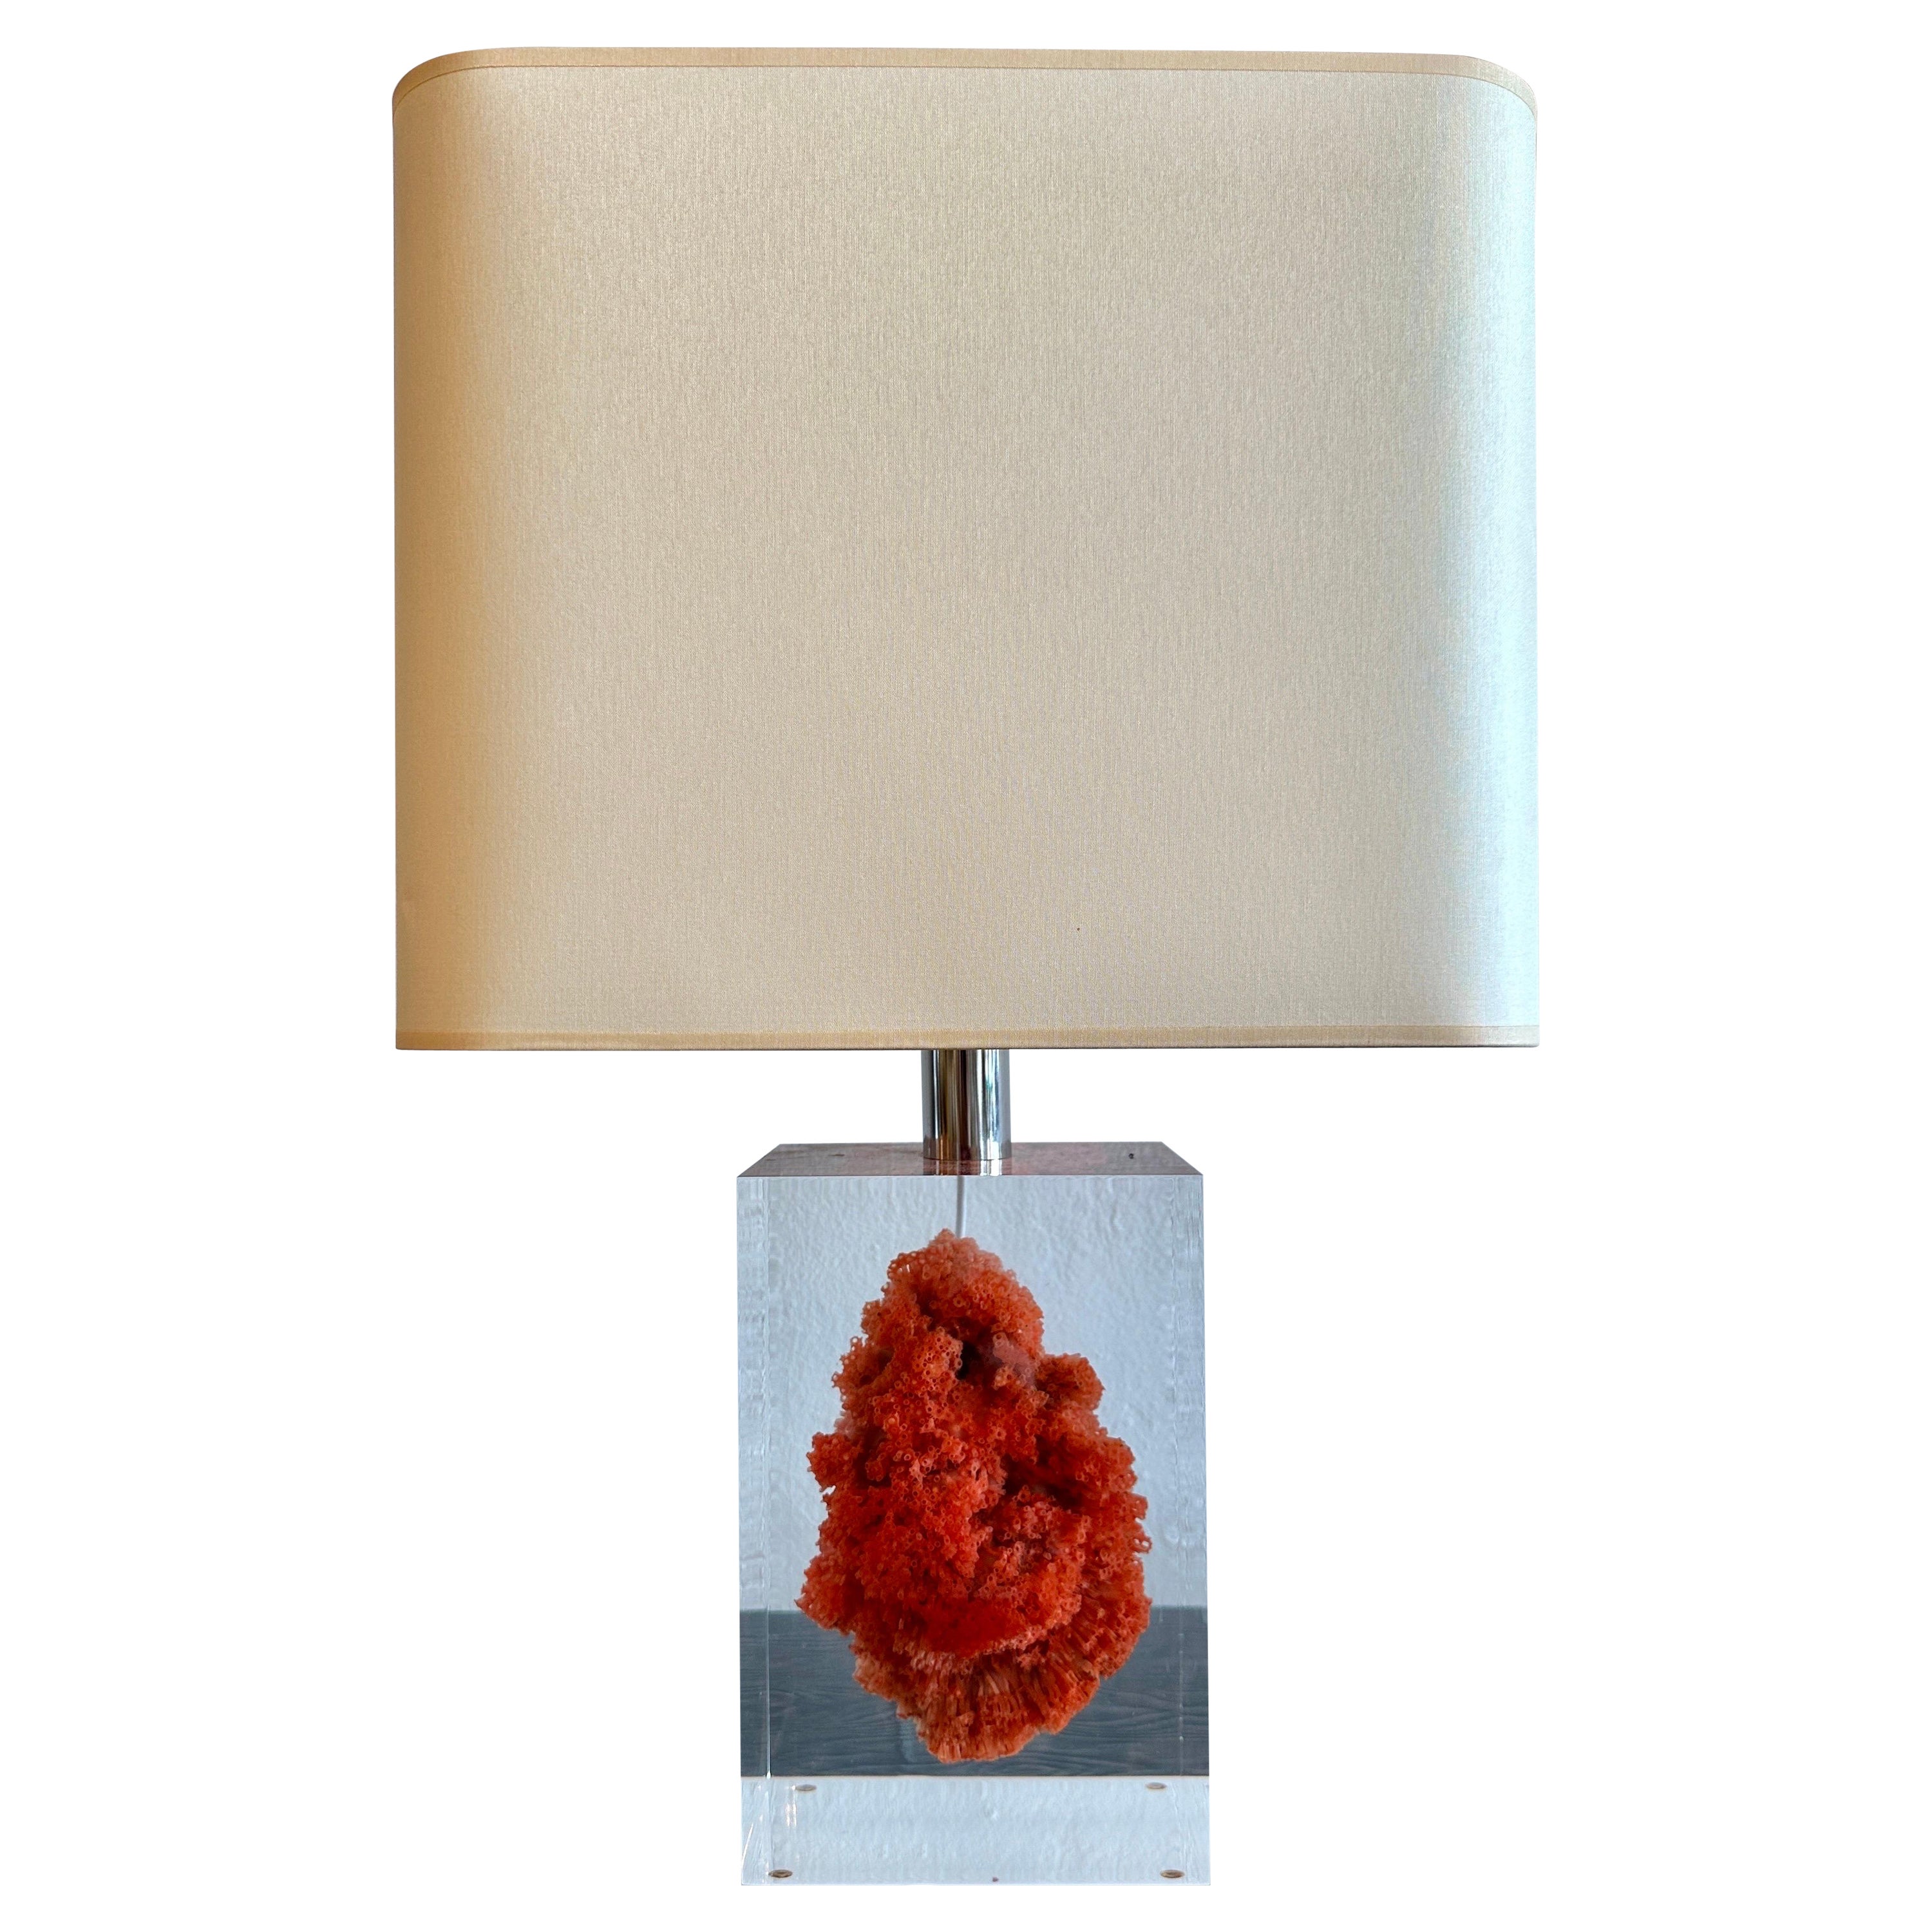 Red Coral Specimen Floating in Lucite Block Table Lamp